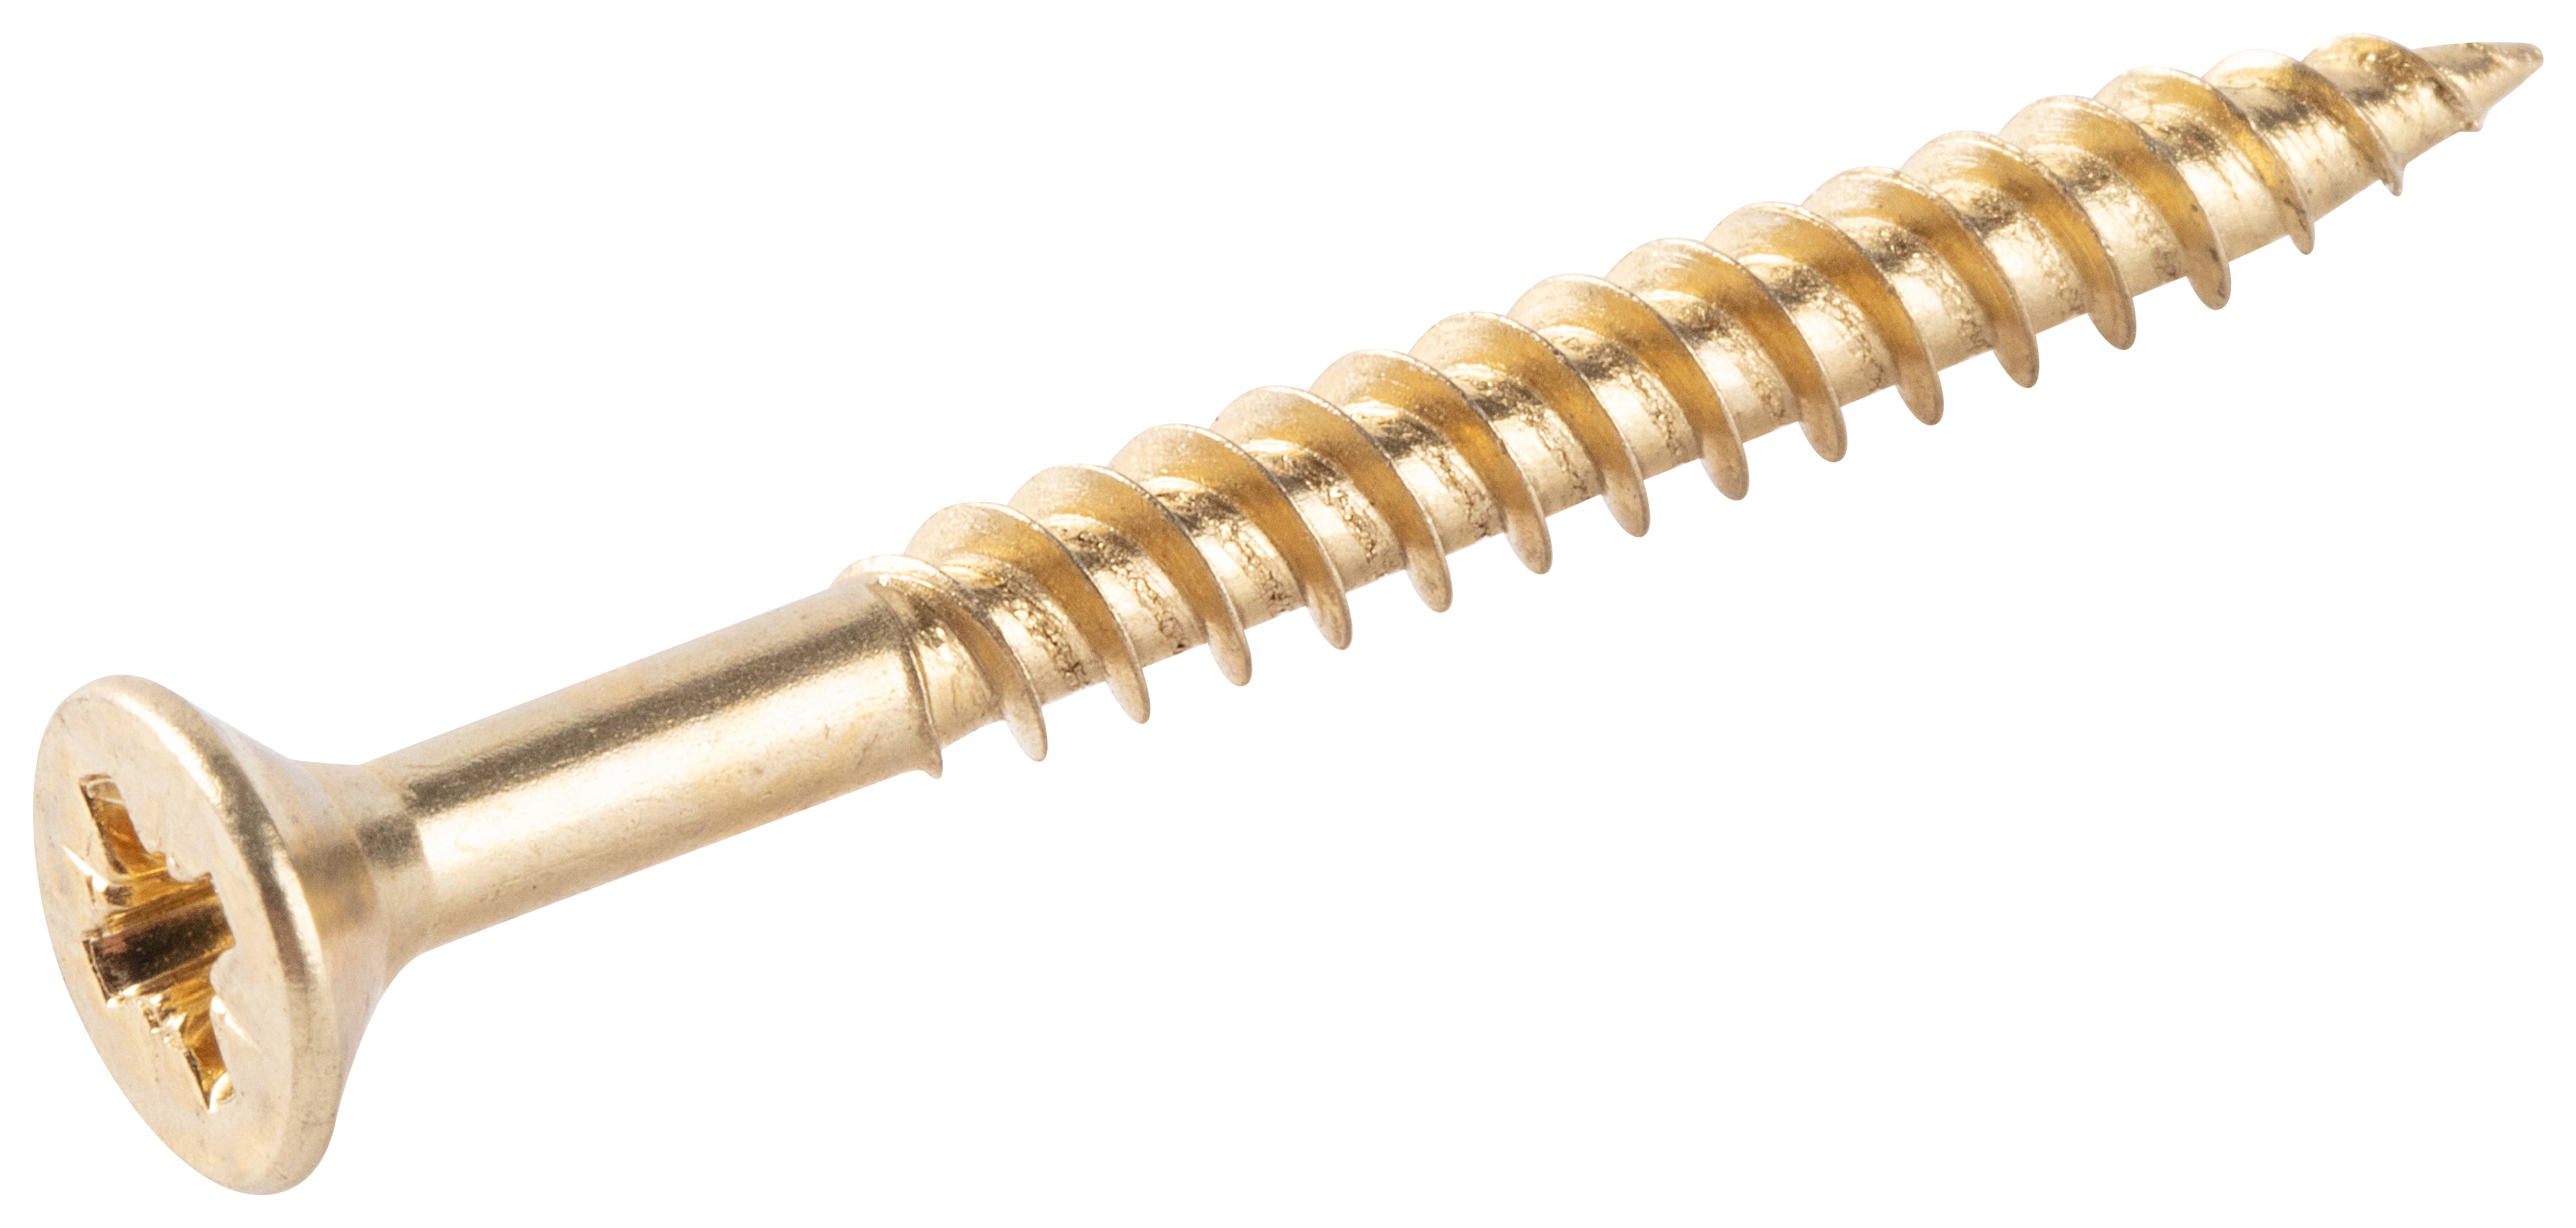 Wickes Brass Plated Wood Screws - 4 x 45mm - Pack of 50